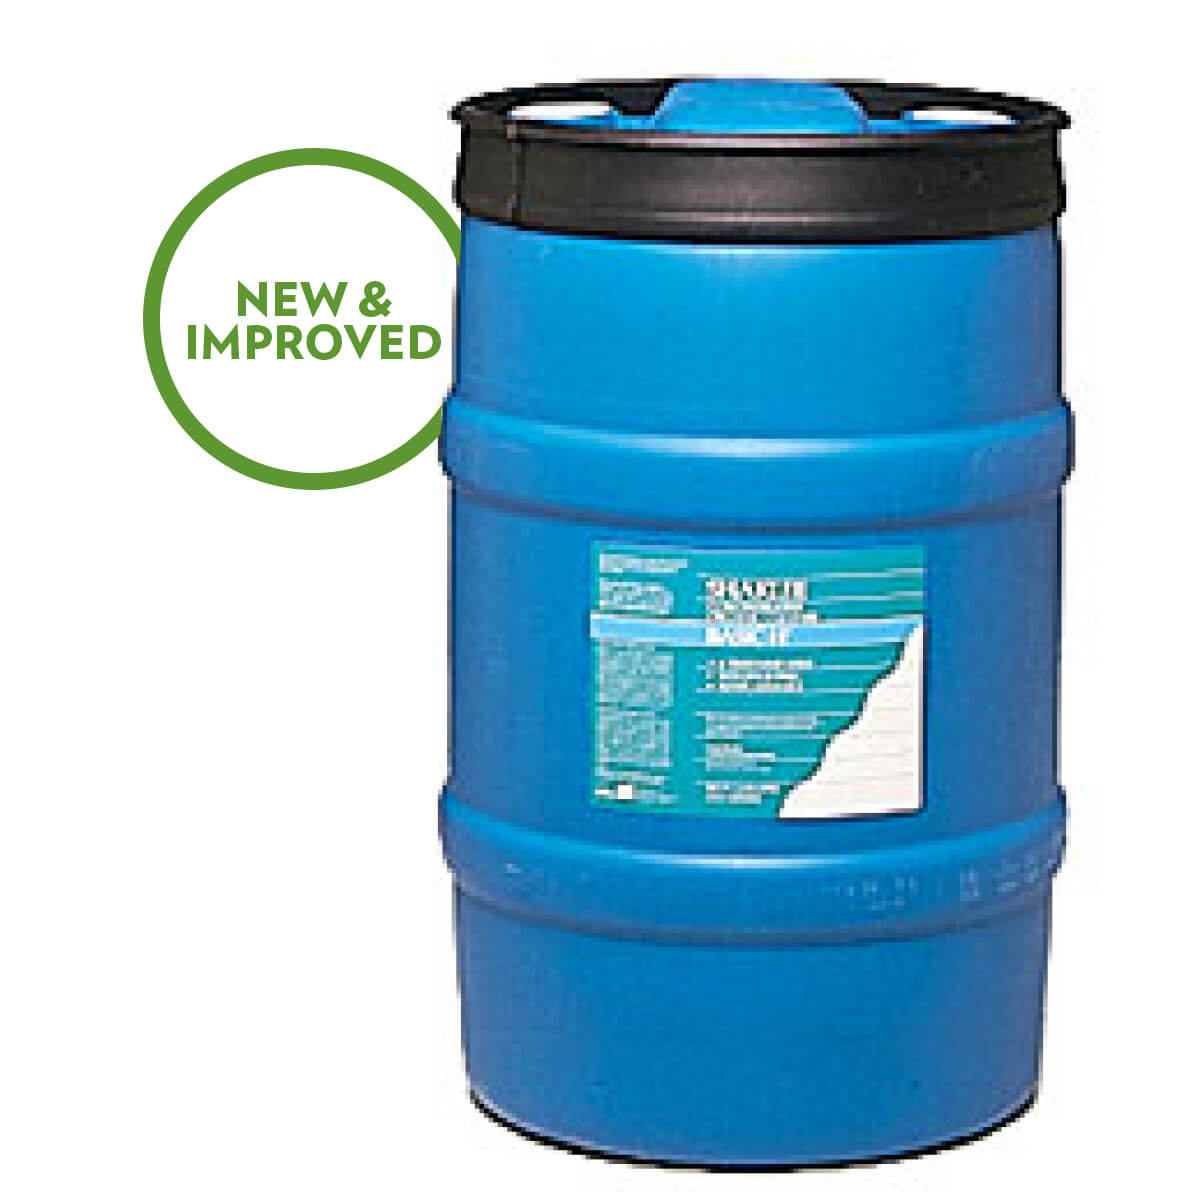 Basic H Cleaner Gallon Size Type Shaklee Us Site